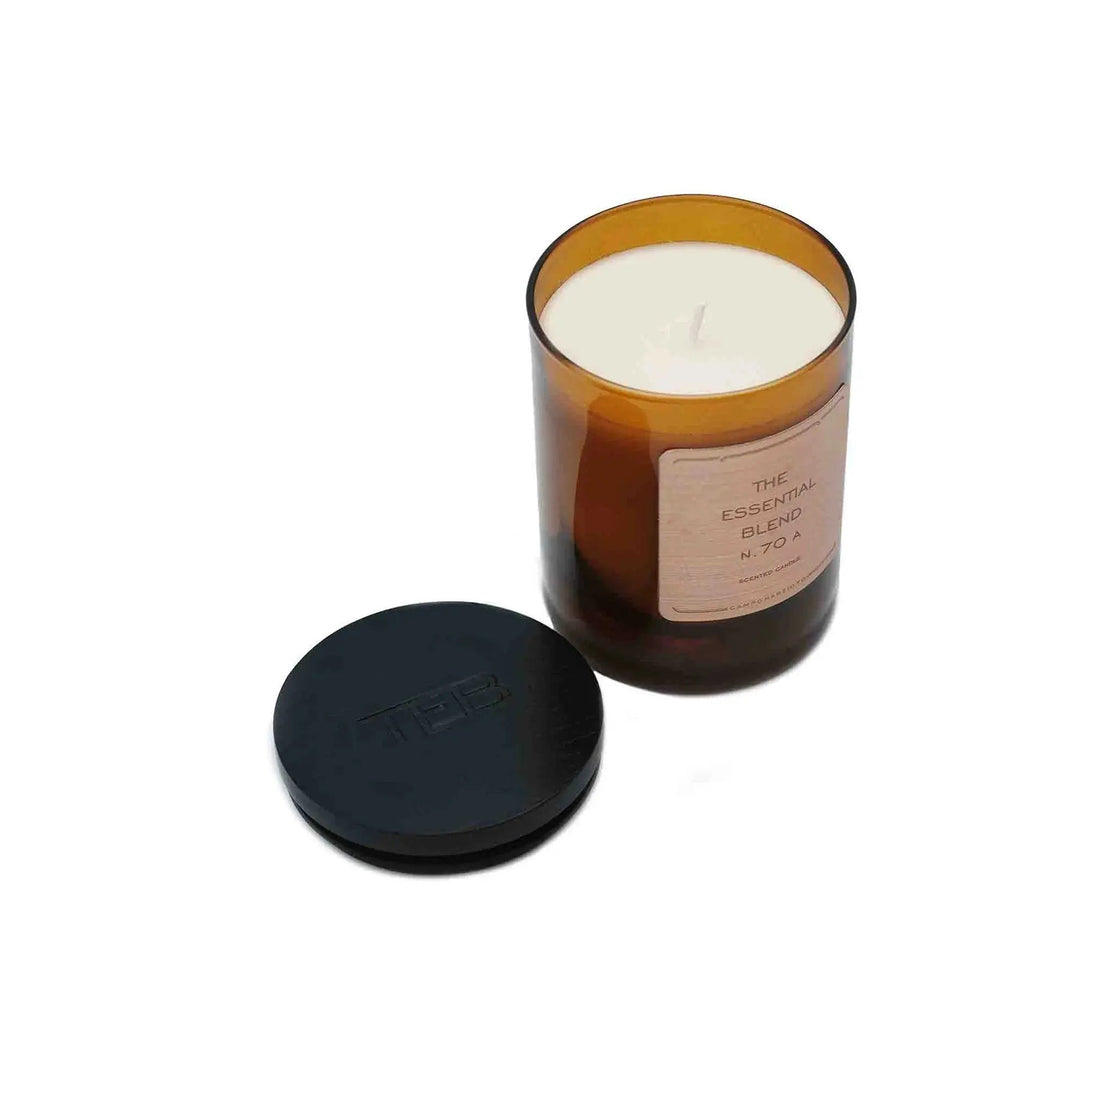 Candle N.70/A The Essential Blend 250gr